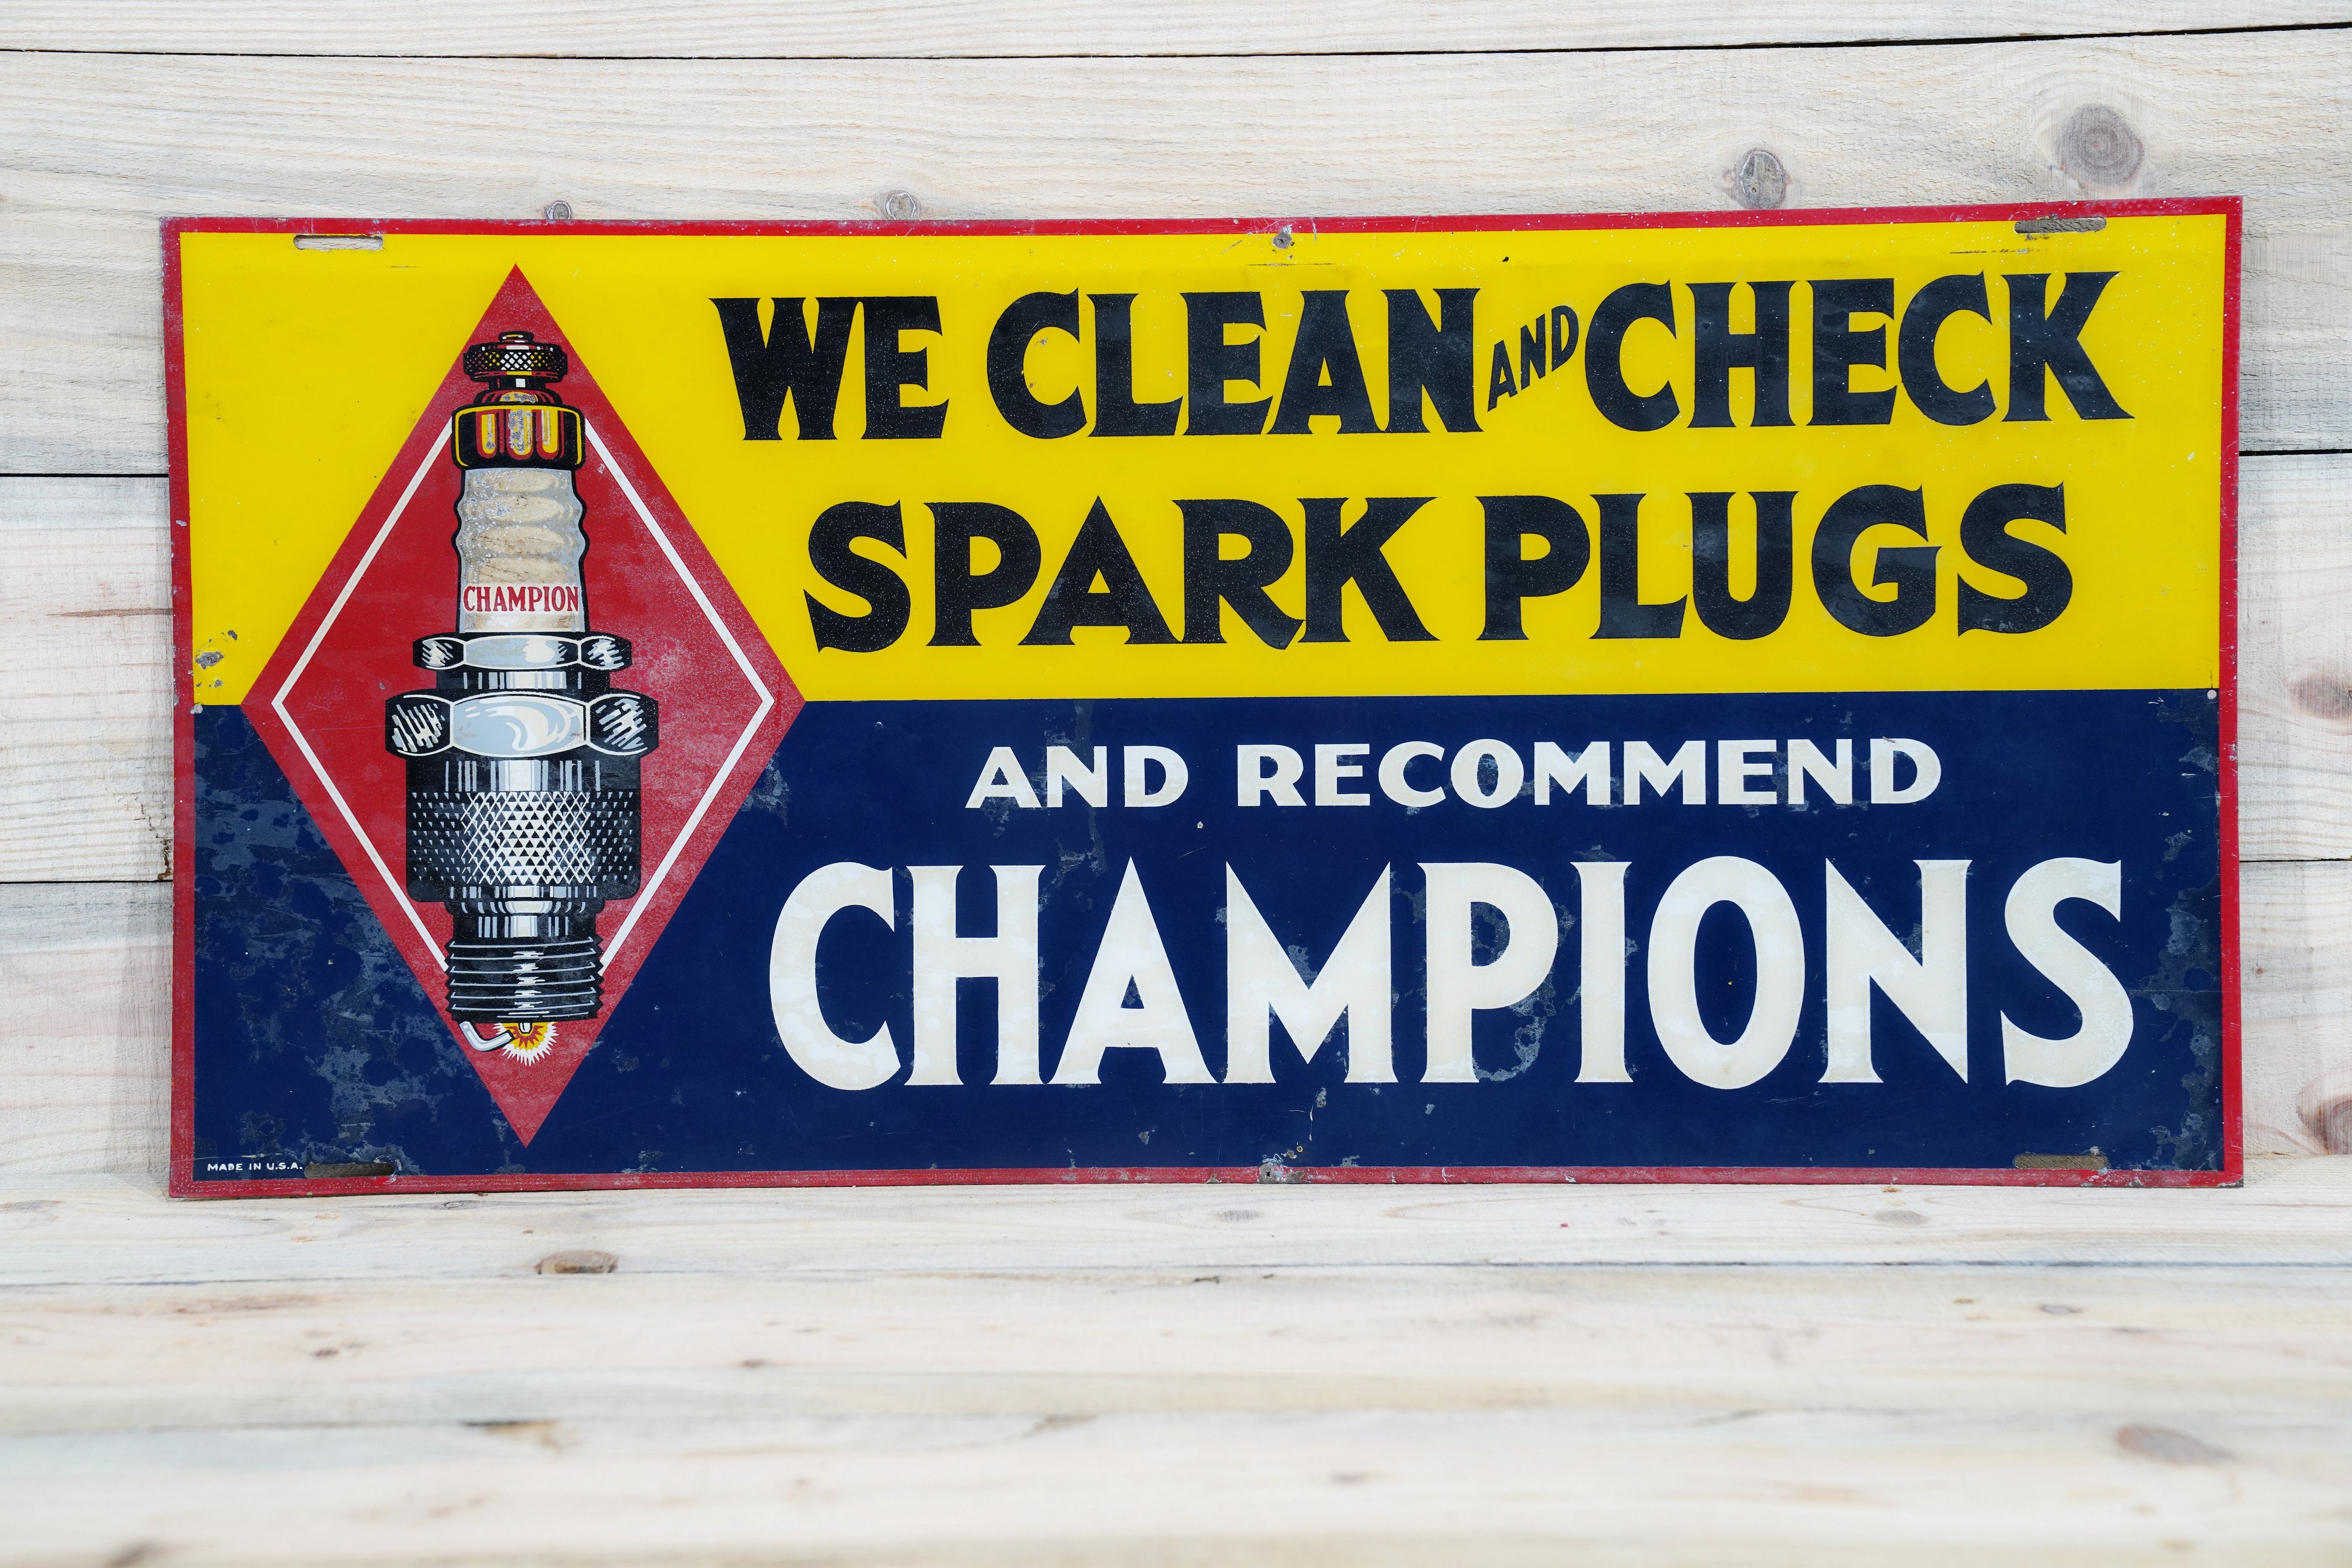 Champion Spark Plugs We Clean & Check Single Sided Tin Sign TAC